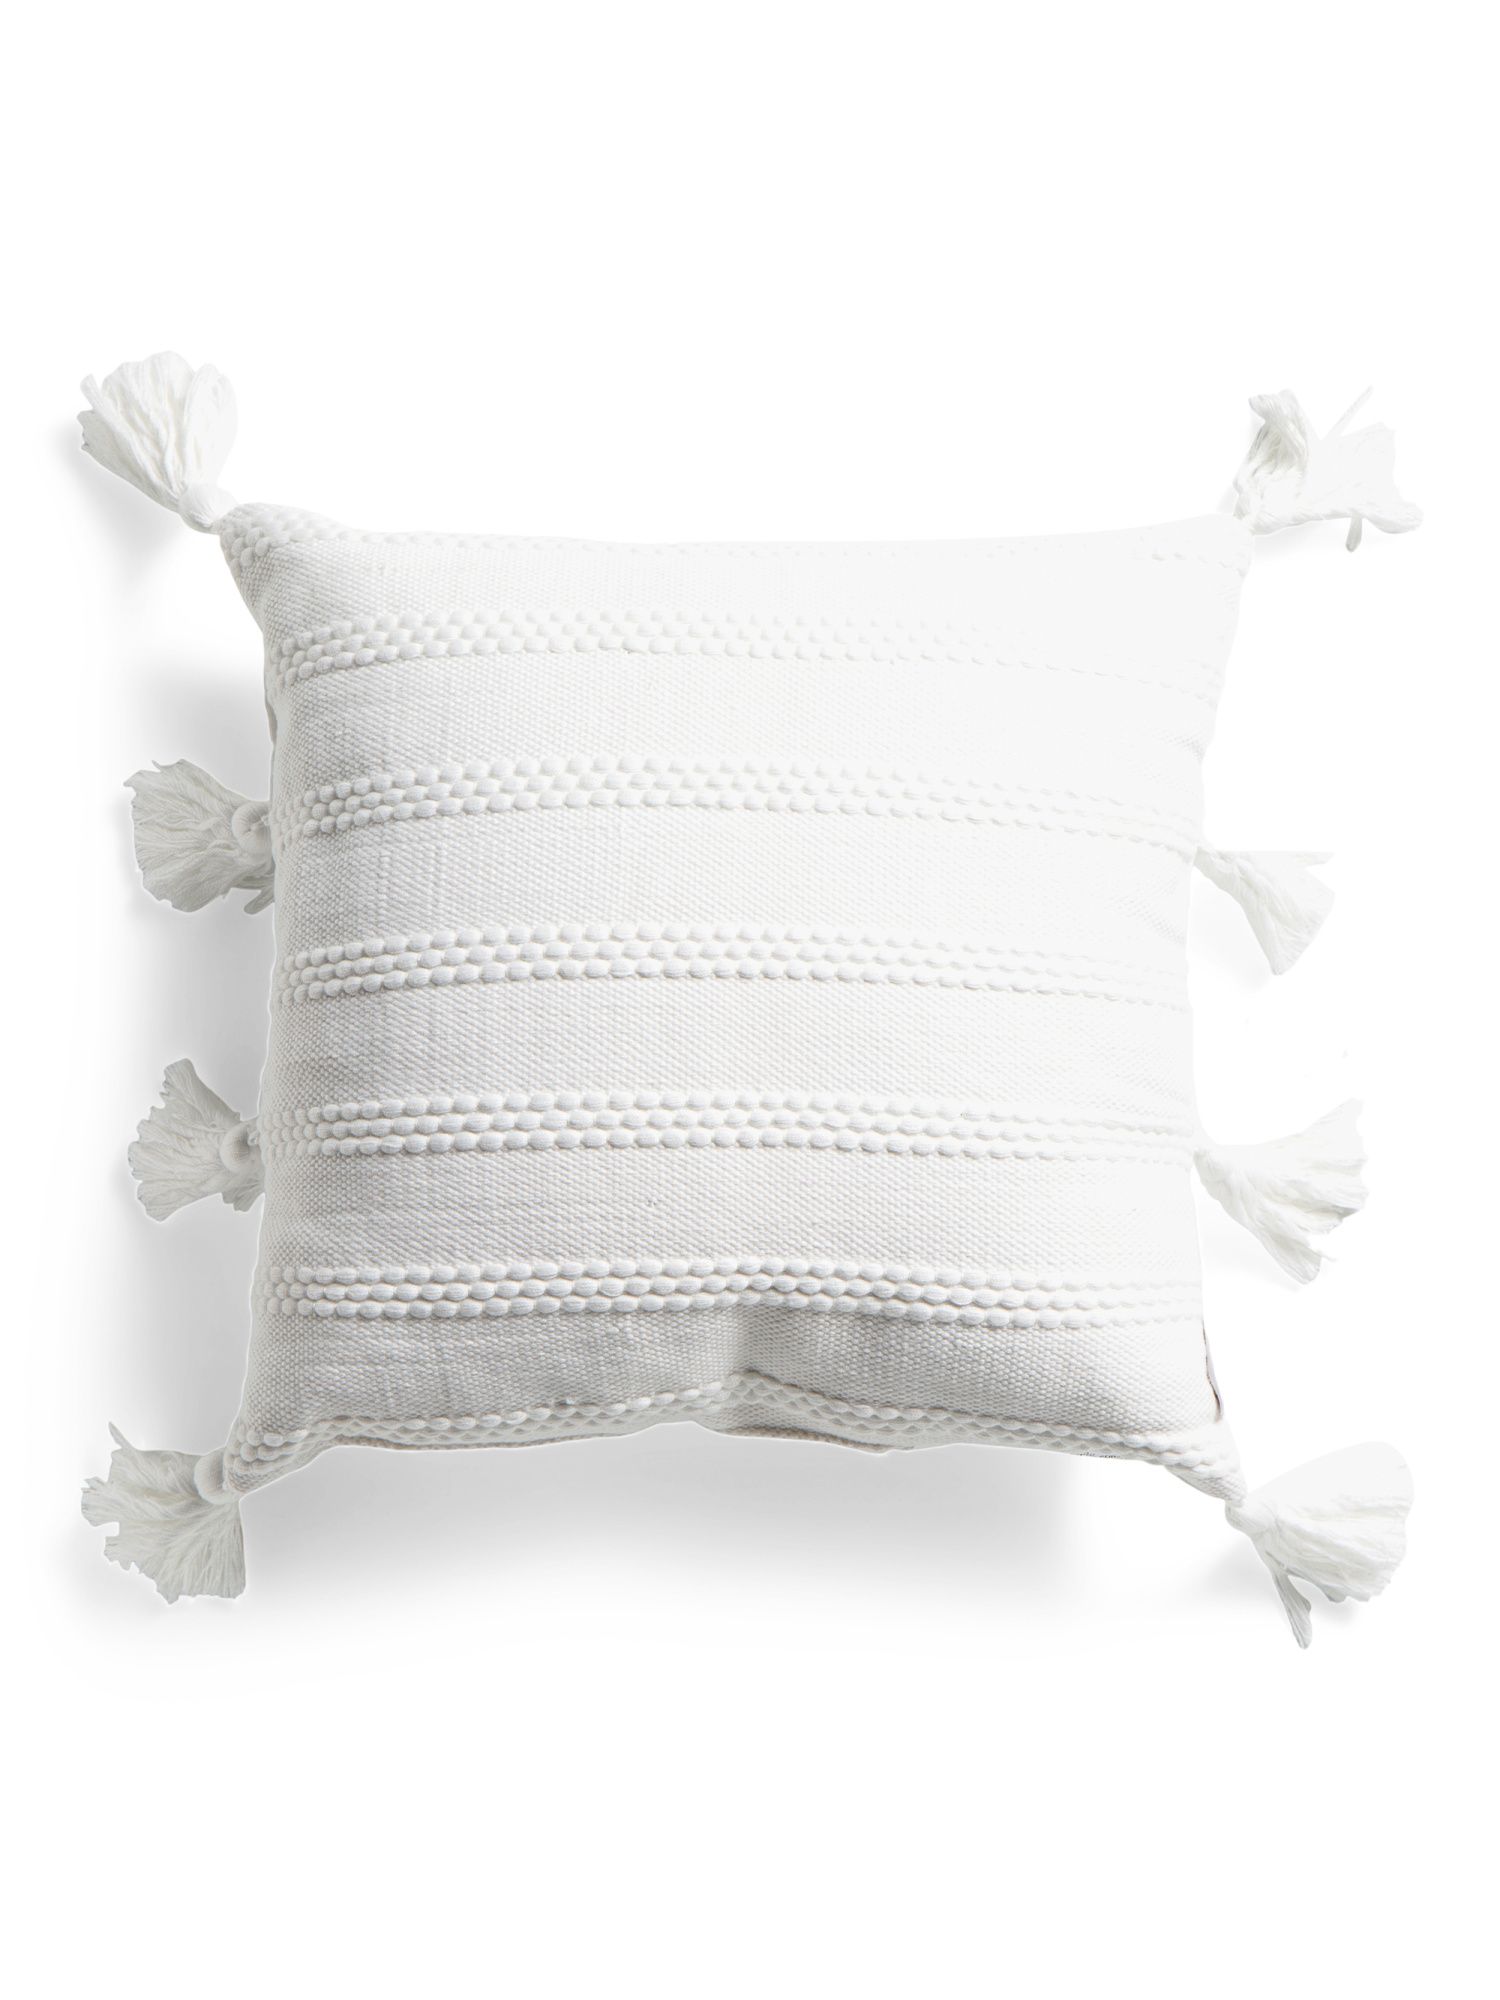 Indoor Outdoor Pillow With Tassels | The Global Decor Shop | Marshalls | Marshalls